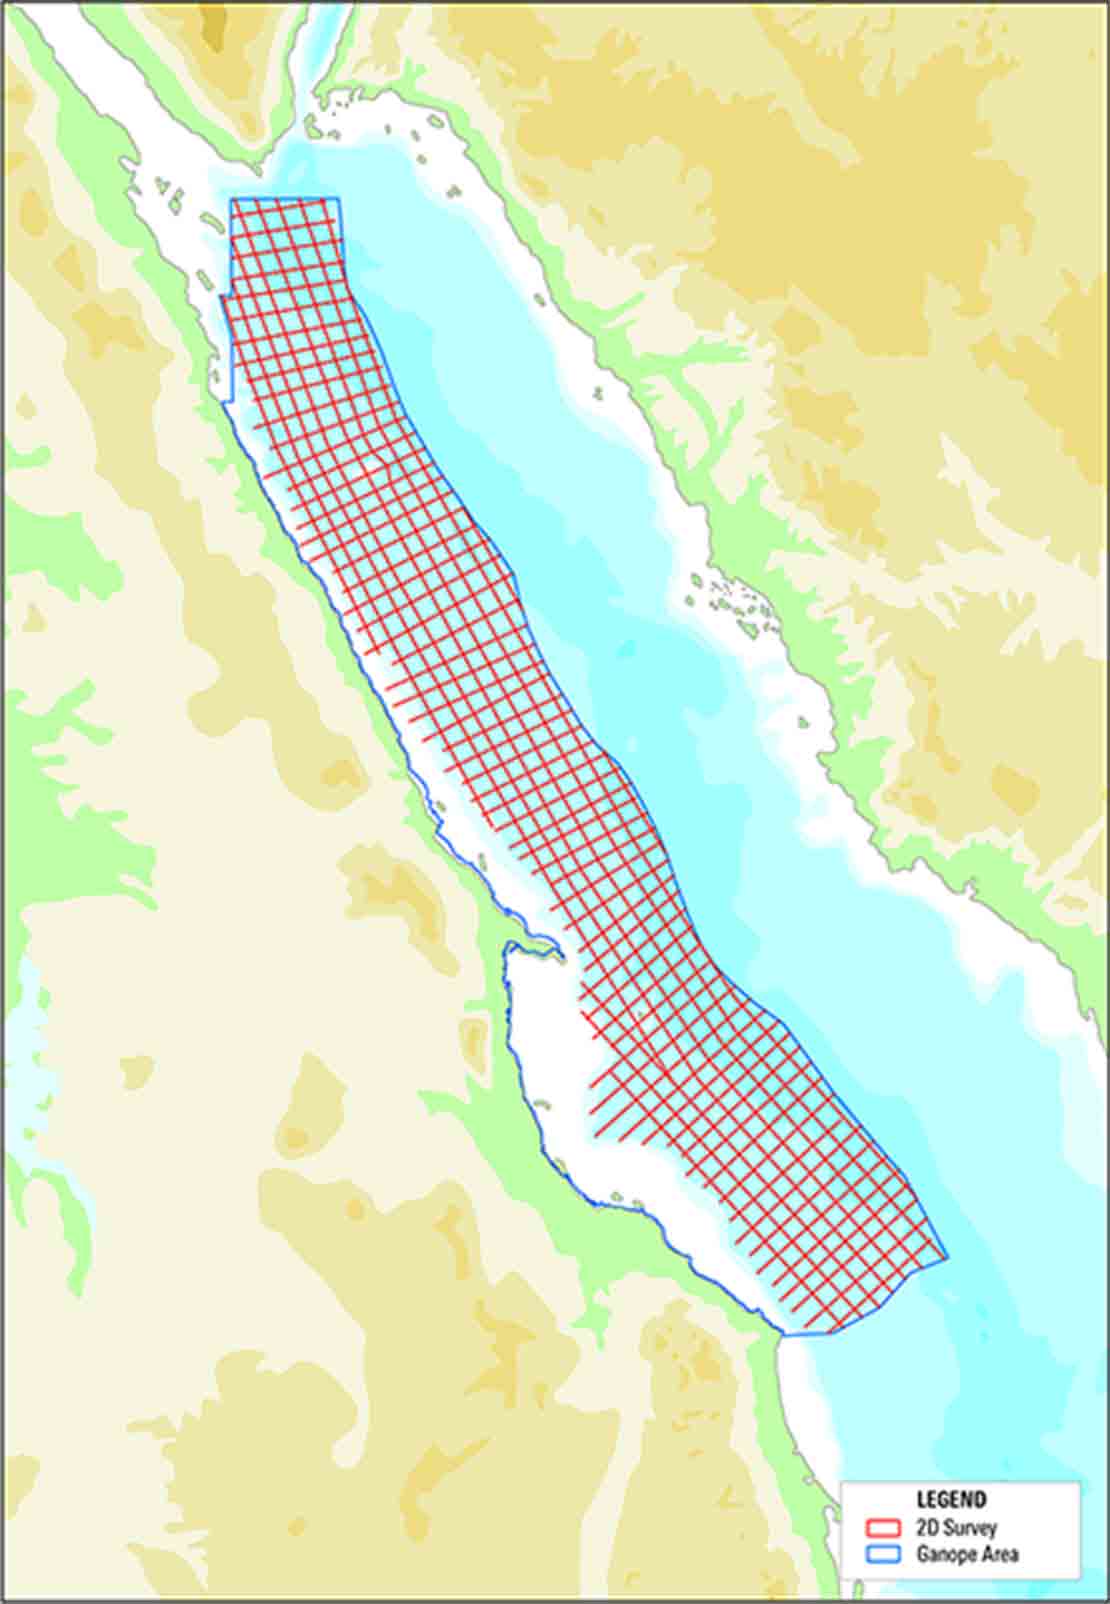 Map of Red Sea 2D multiclient surveys